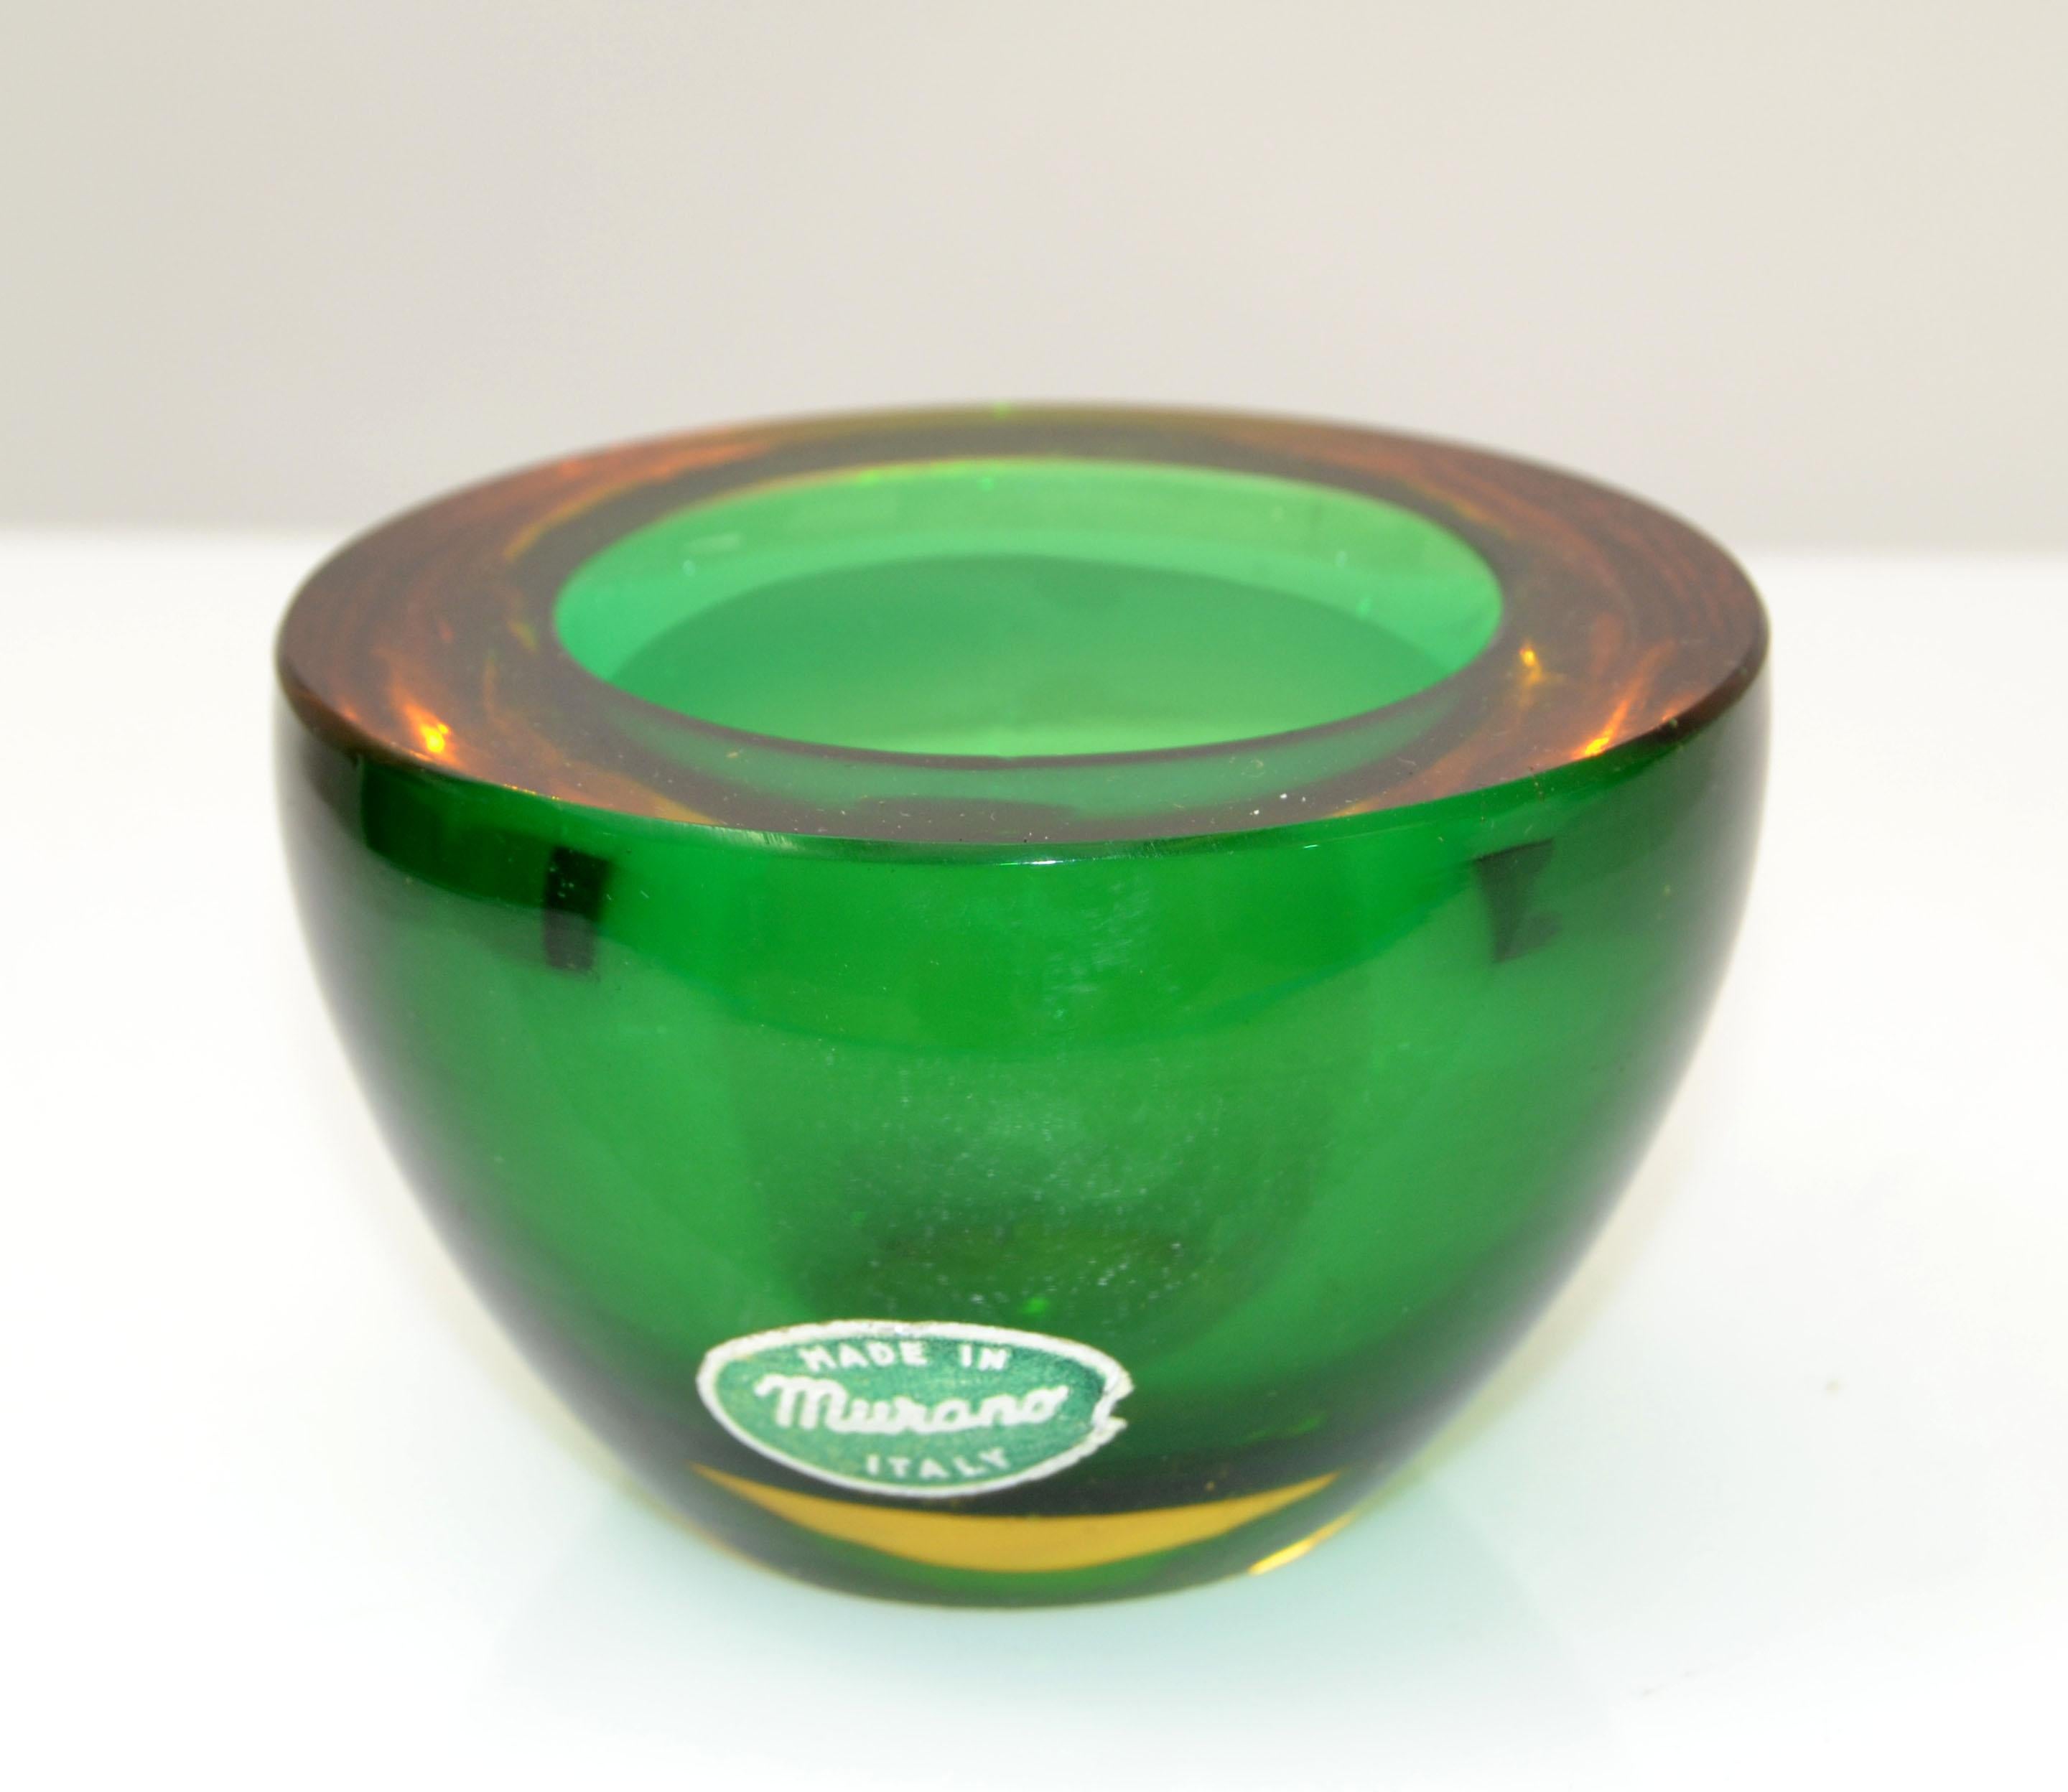 Mid-Century Modern Murano art glass bowl in amber and green, blown glass catchall, made in Italy.
Heavy glass bowl with outstanding details.
Foil Label at the Base.